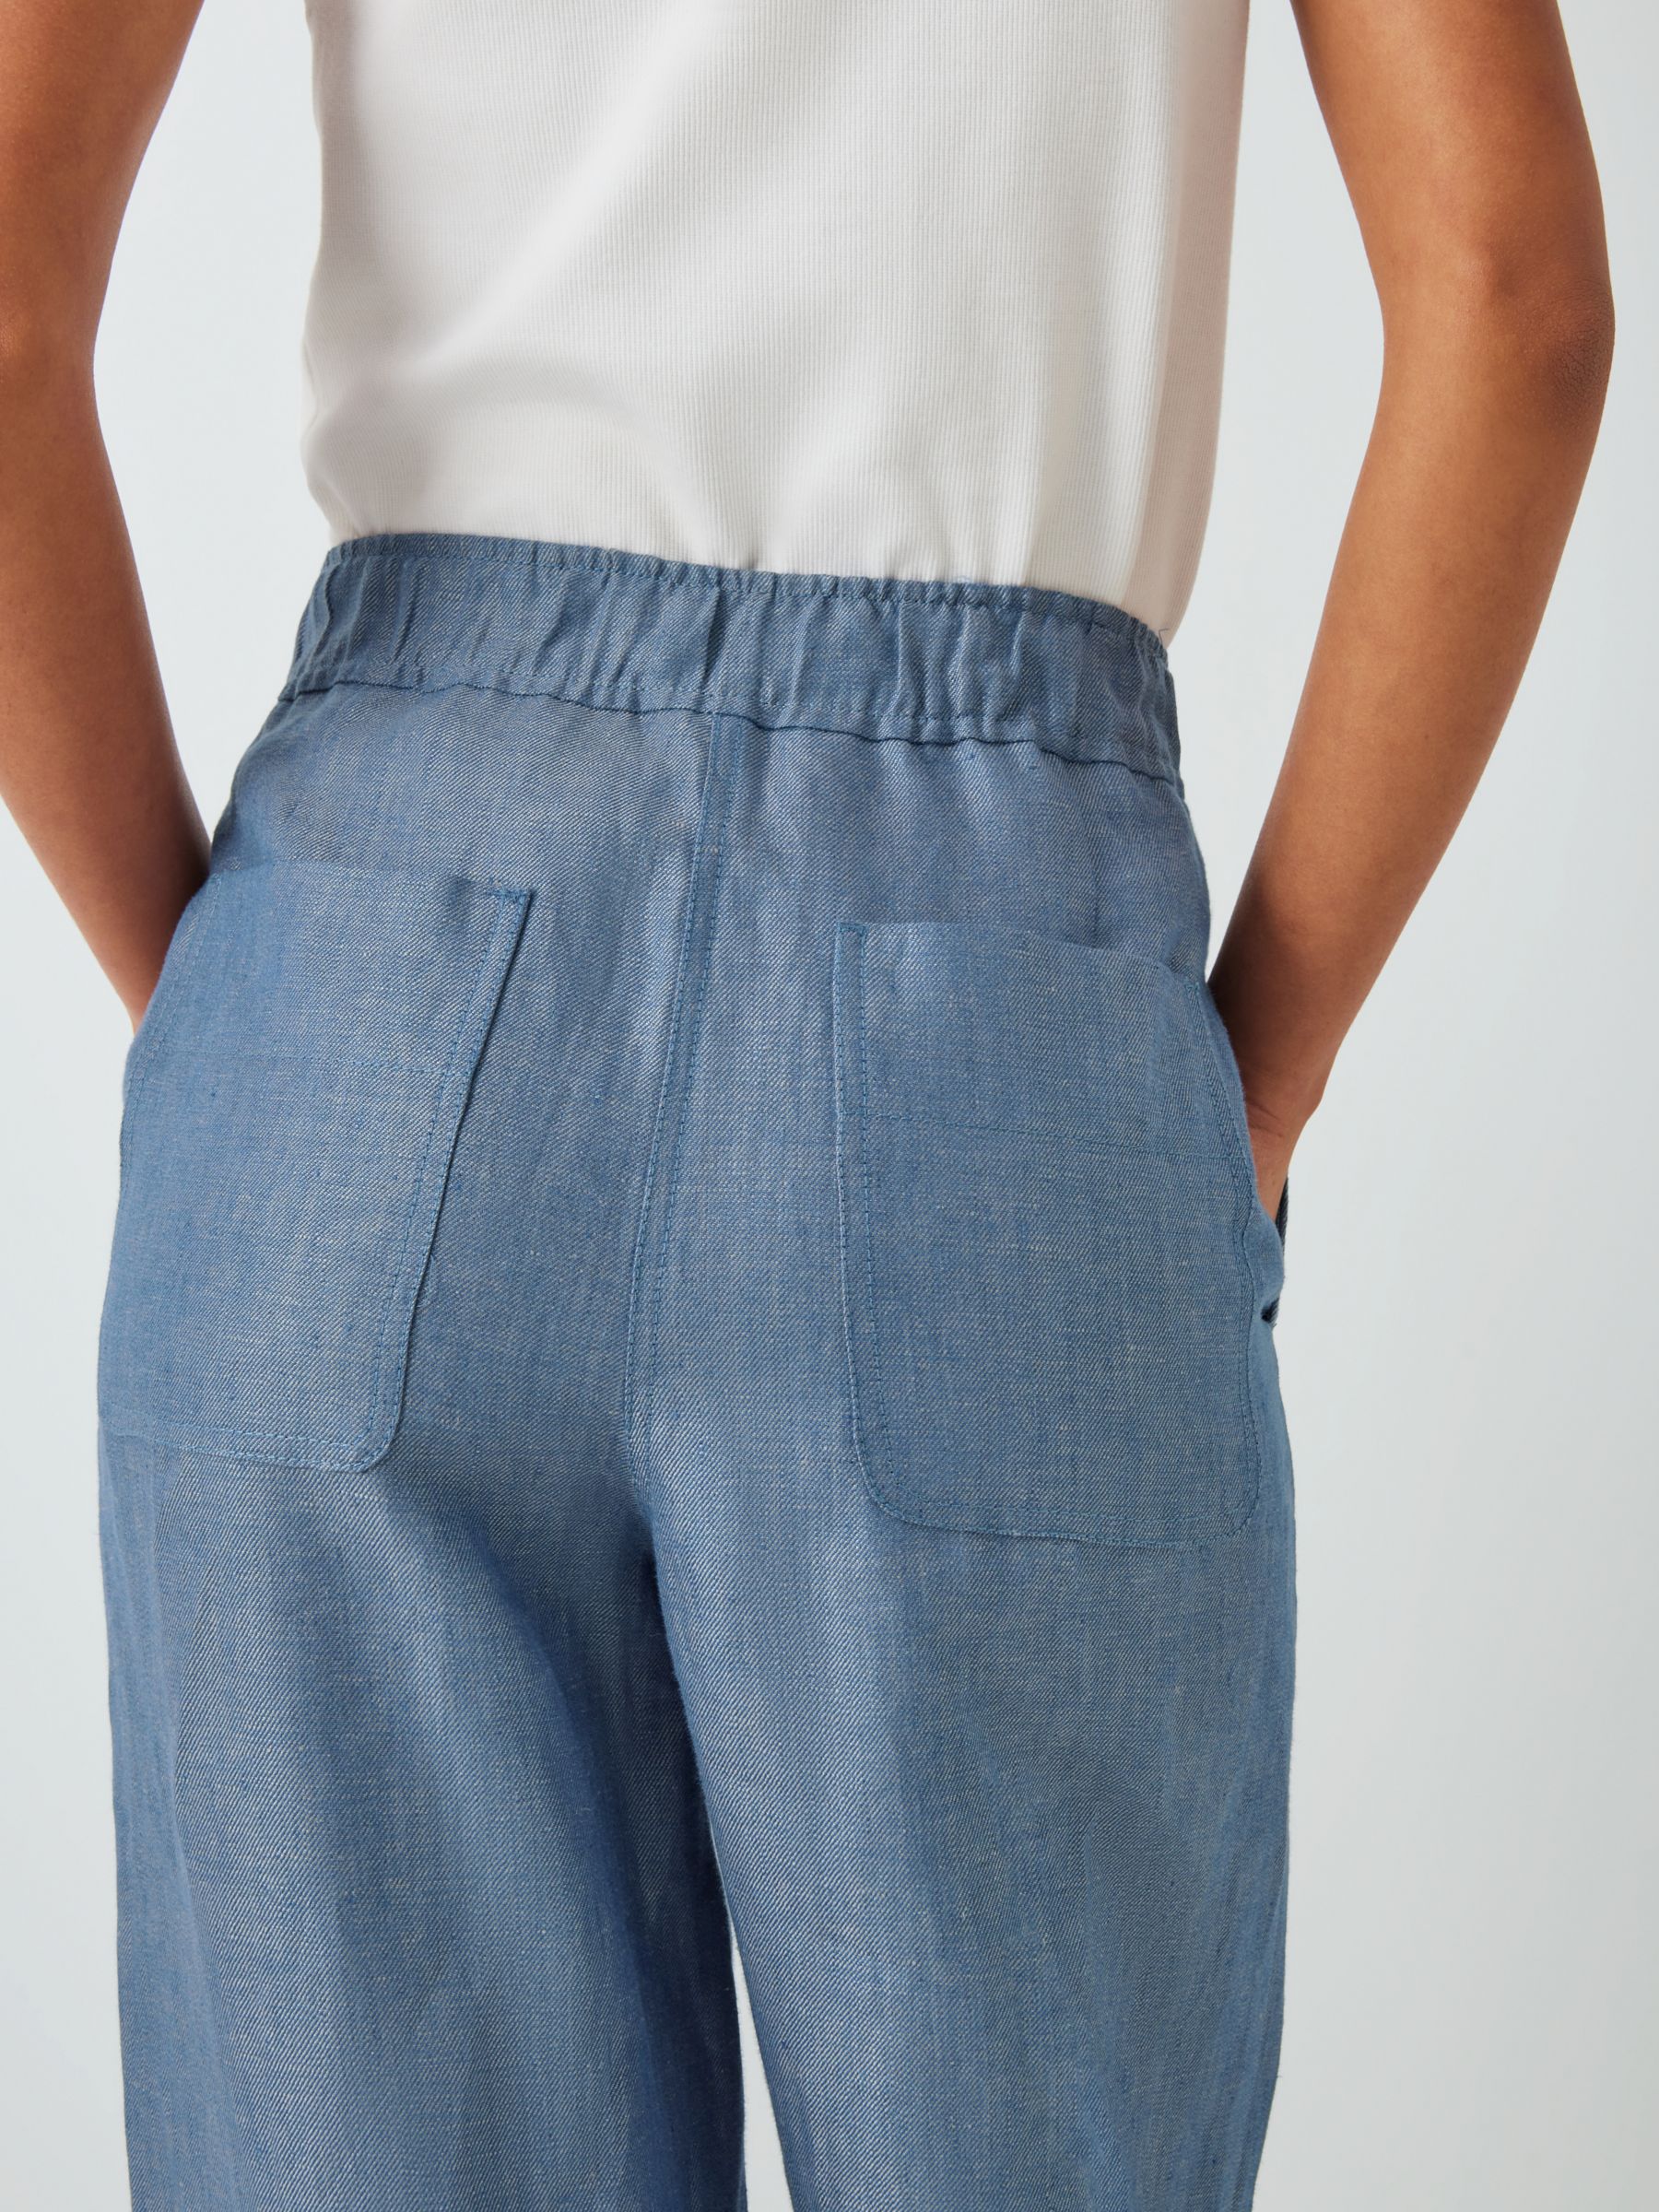 John Lewis Straight Fit Linen Trousers, Blue Twill at John Lewis & Partners